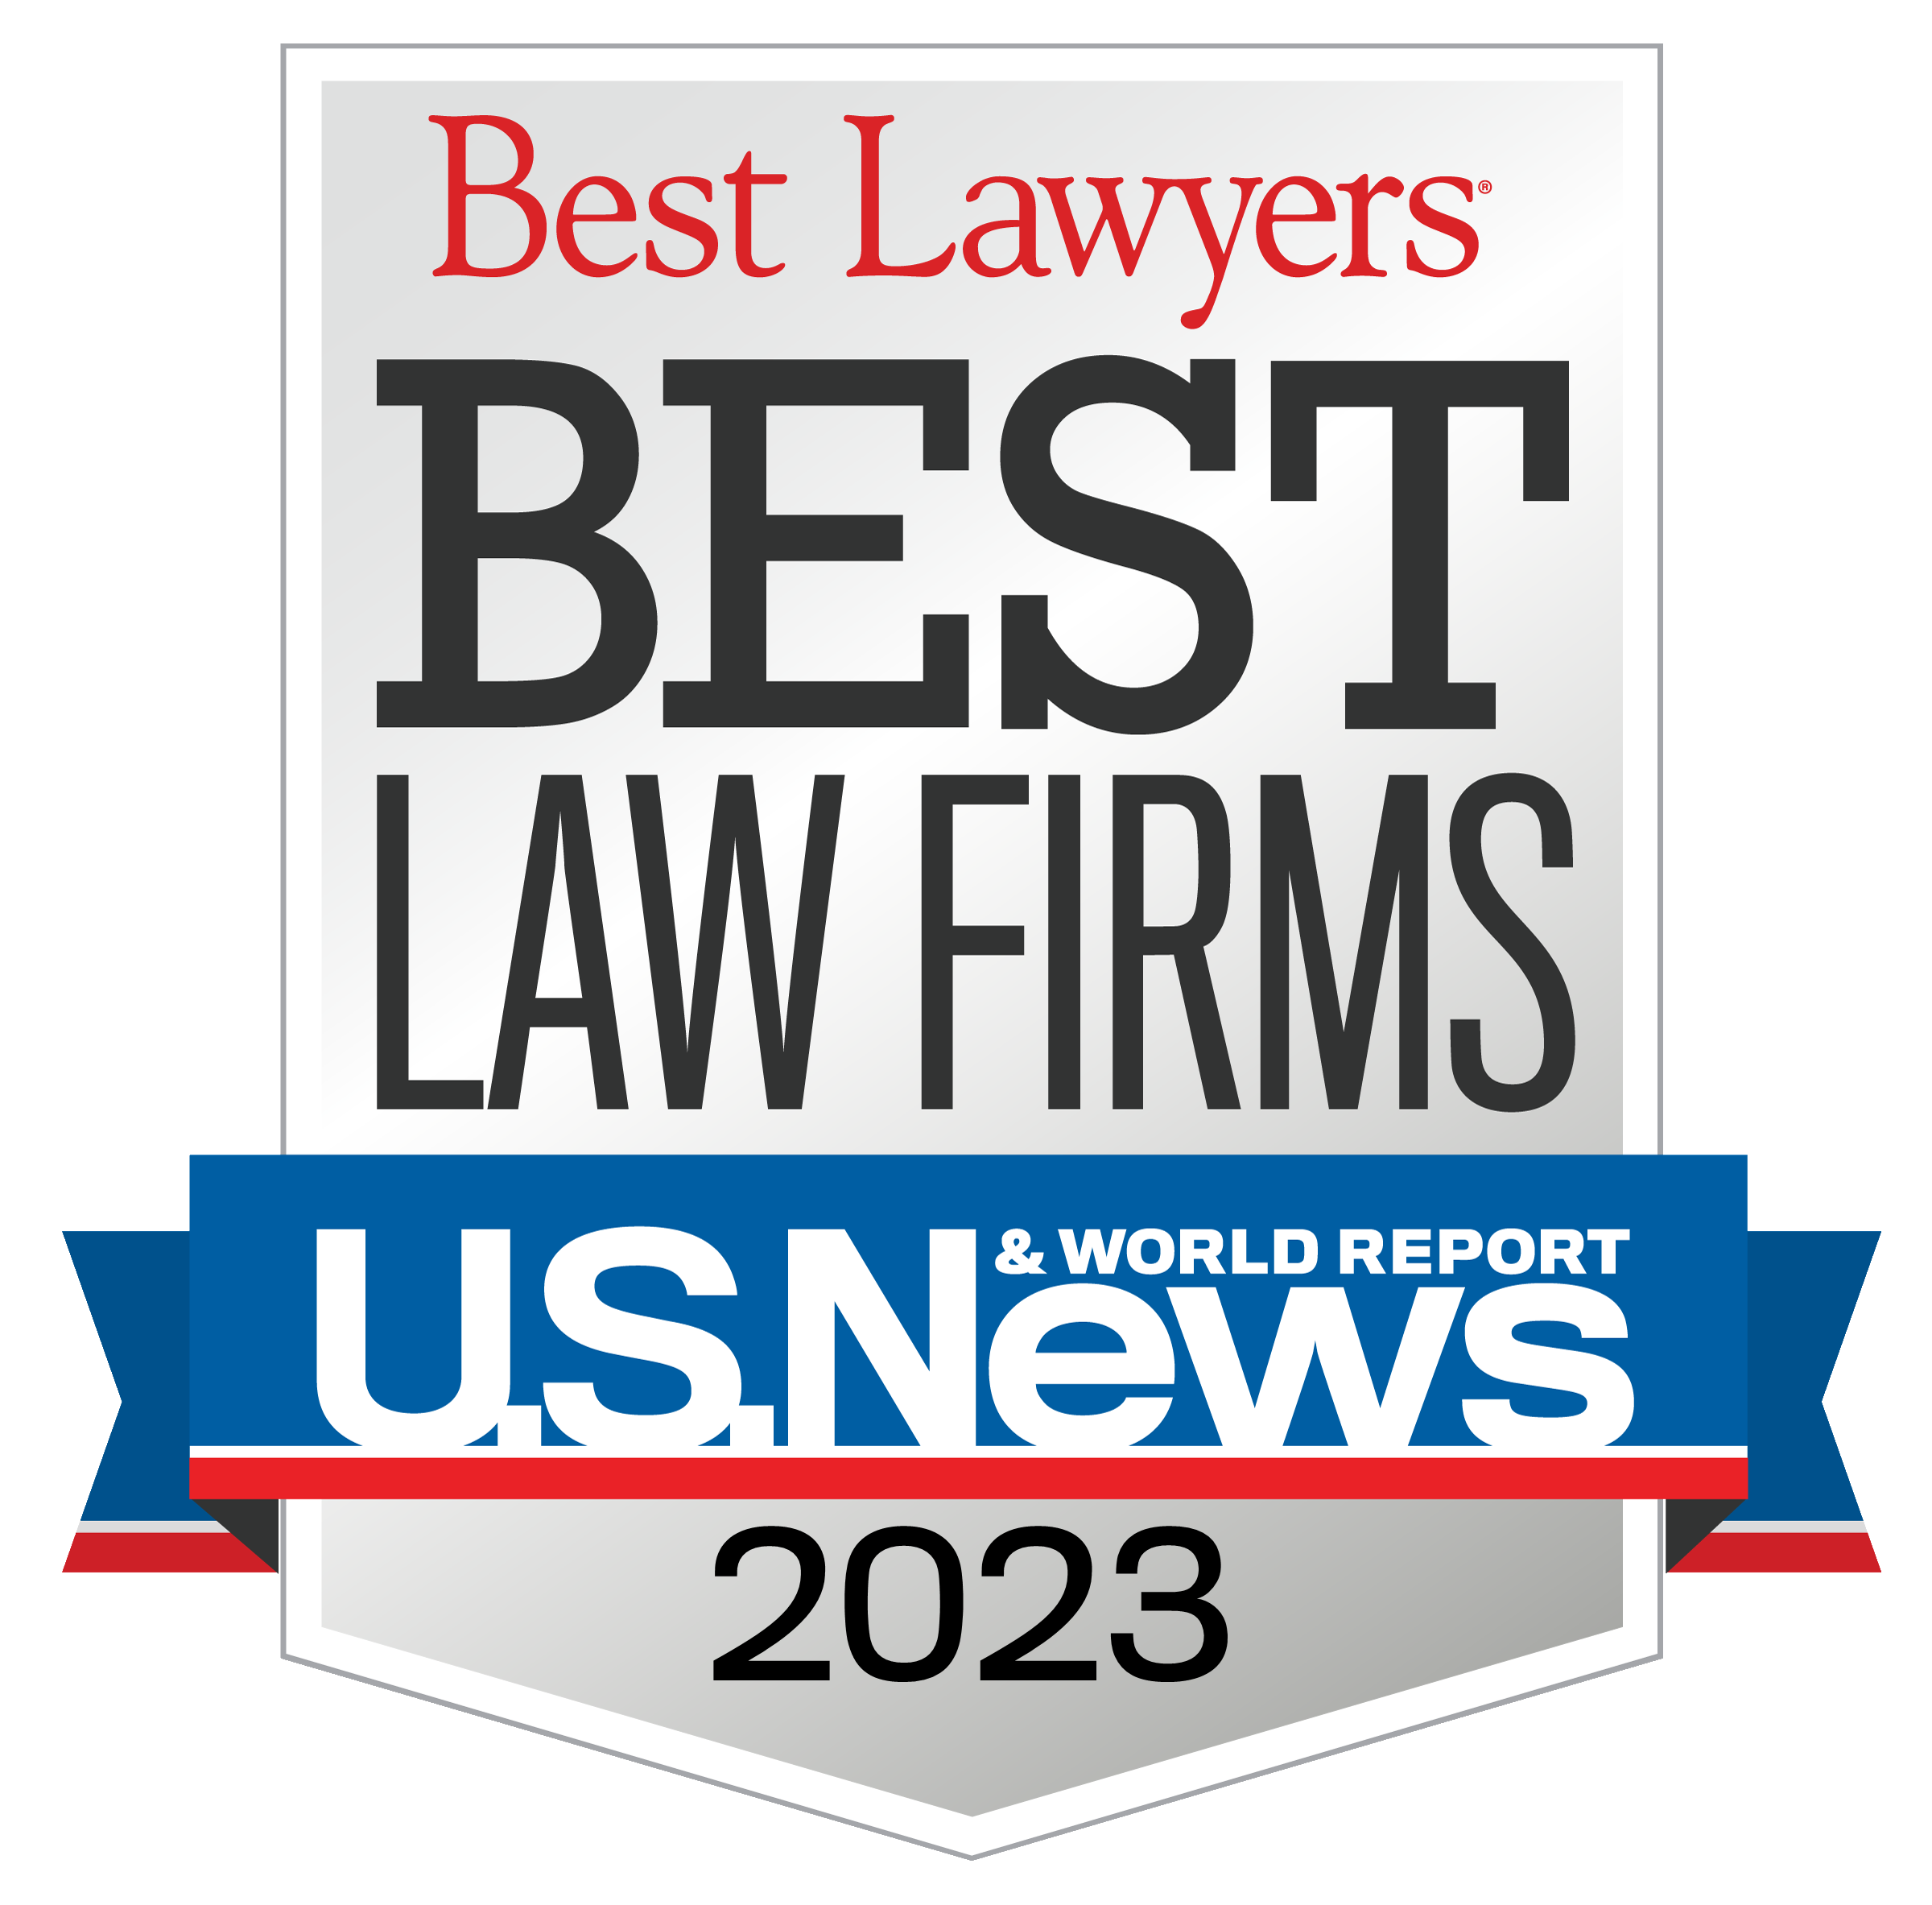 Best Lawyers Best Law Firms Award Image